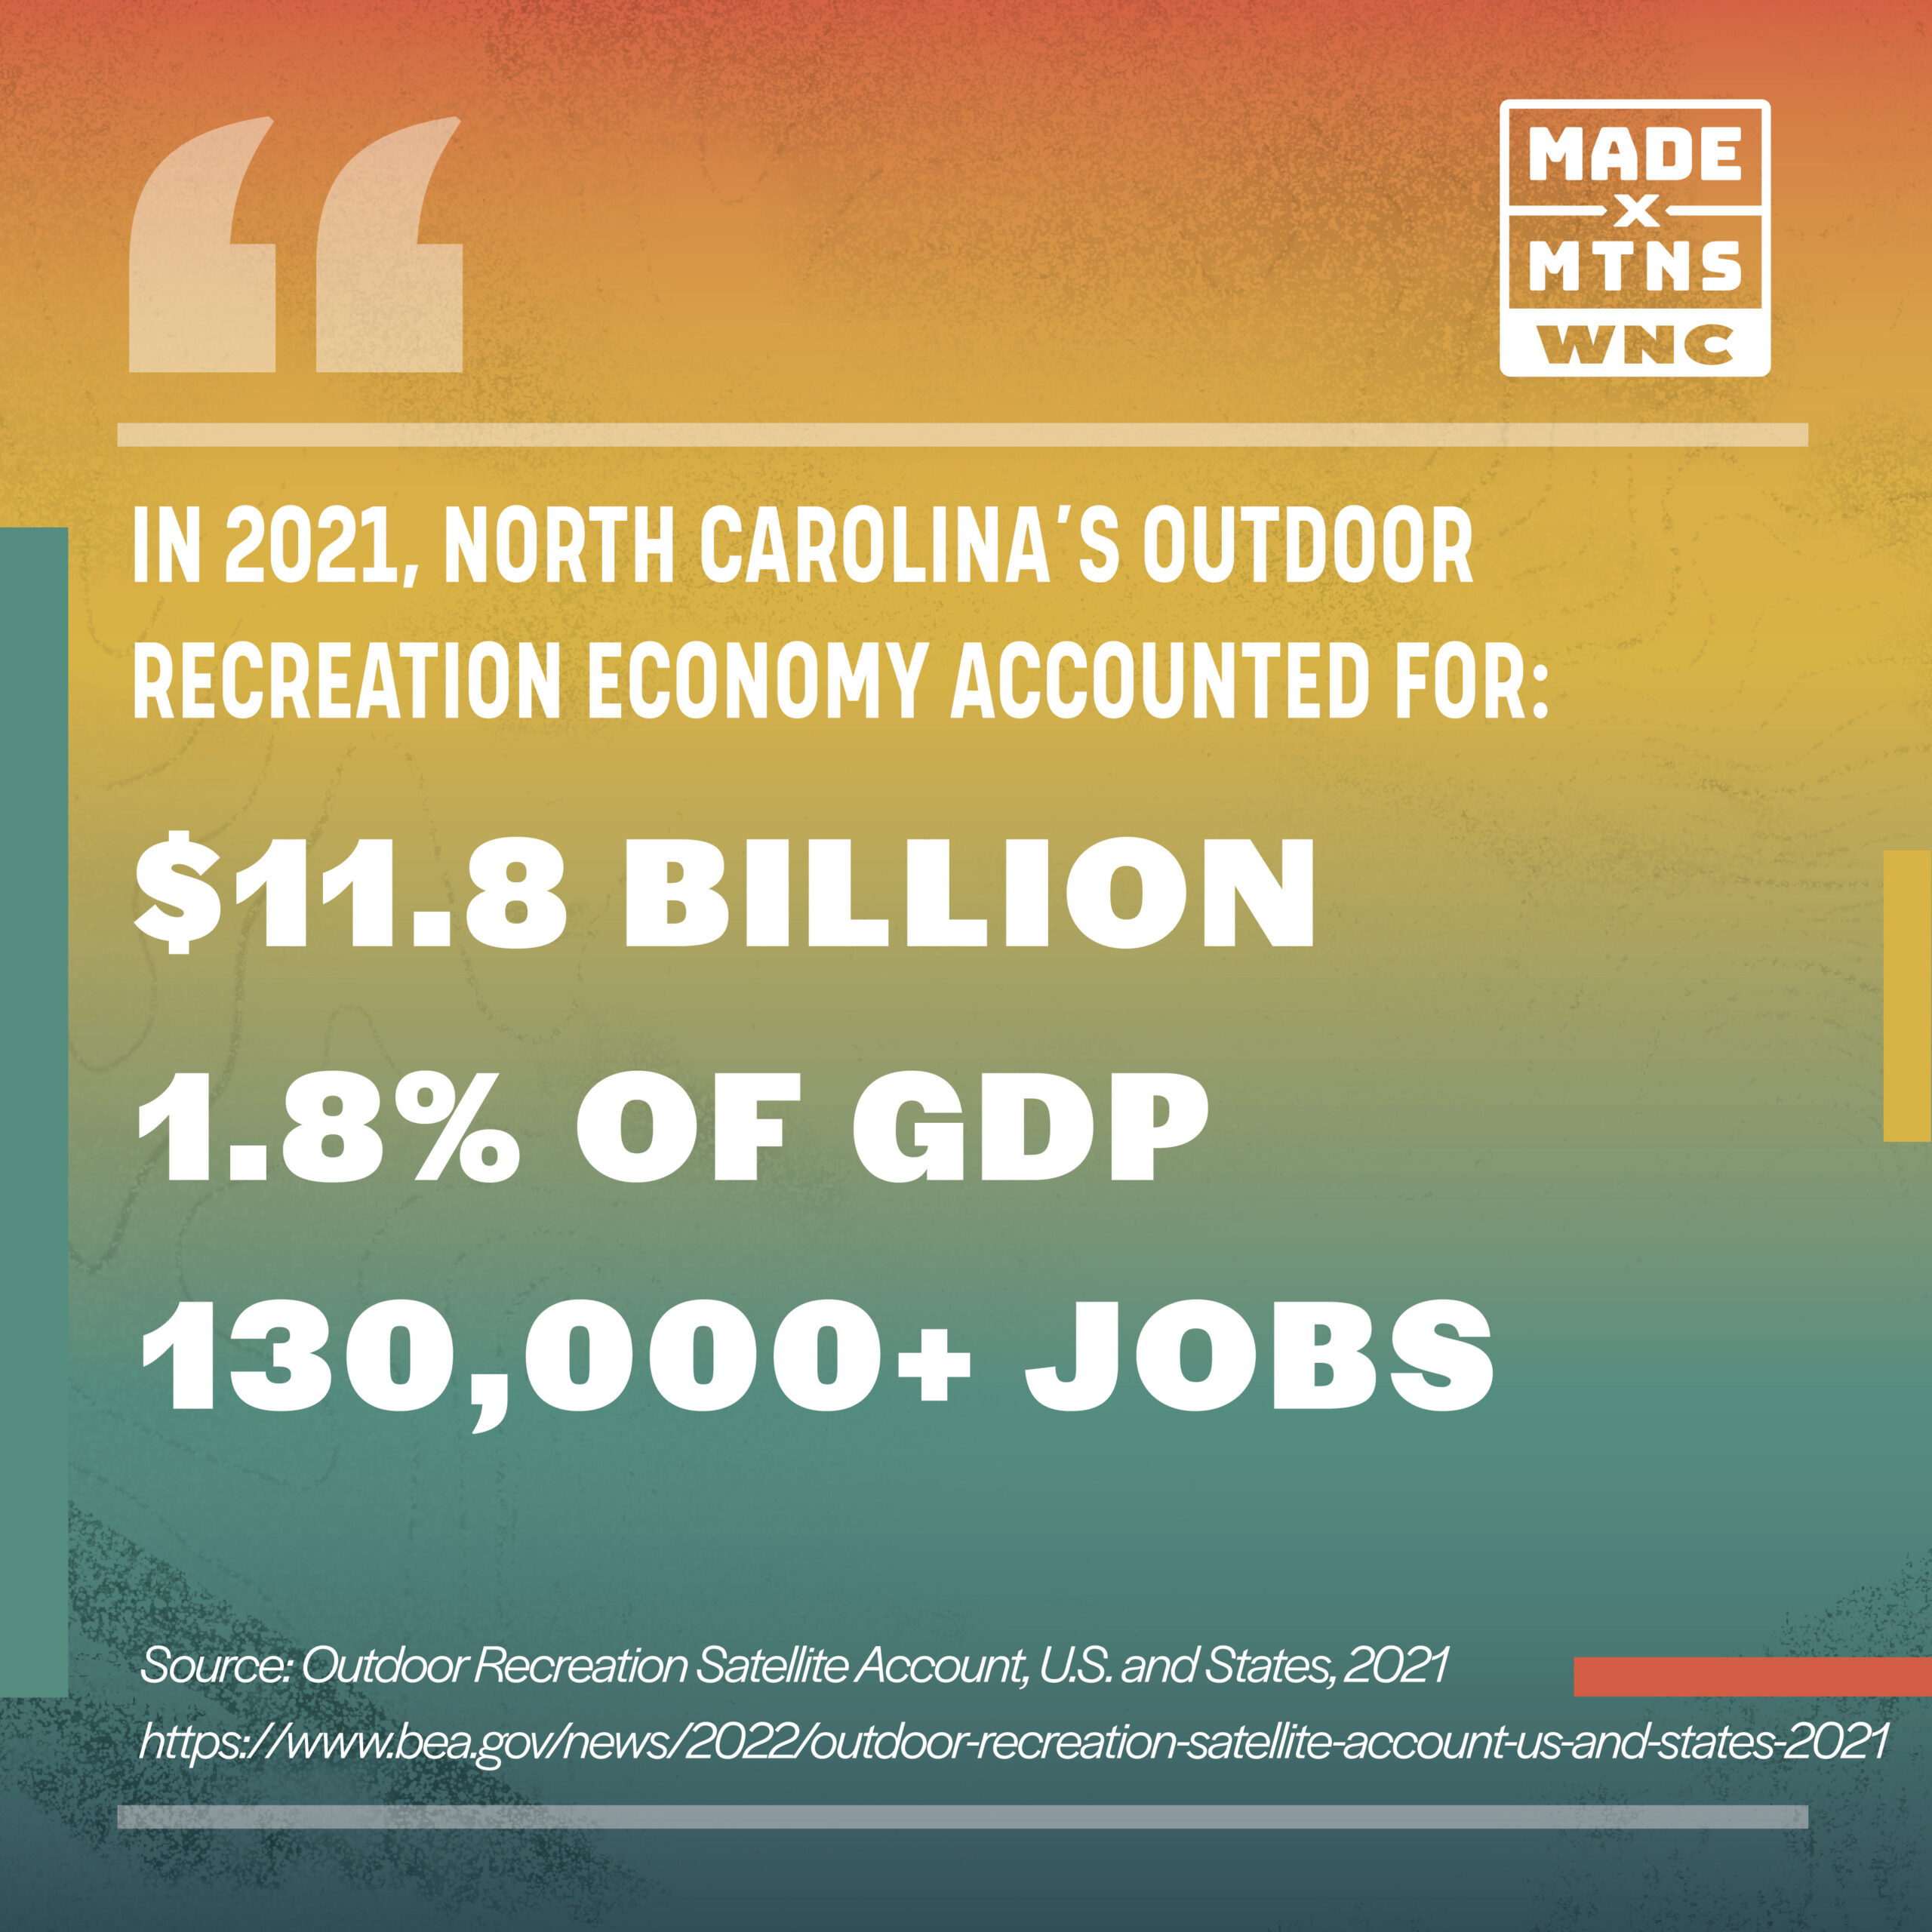 Outdoor recreation is an essential economic driver in North Carolina, according to the U.S. Bureau of Economic Analysis